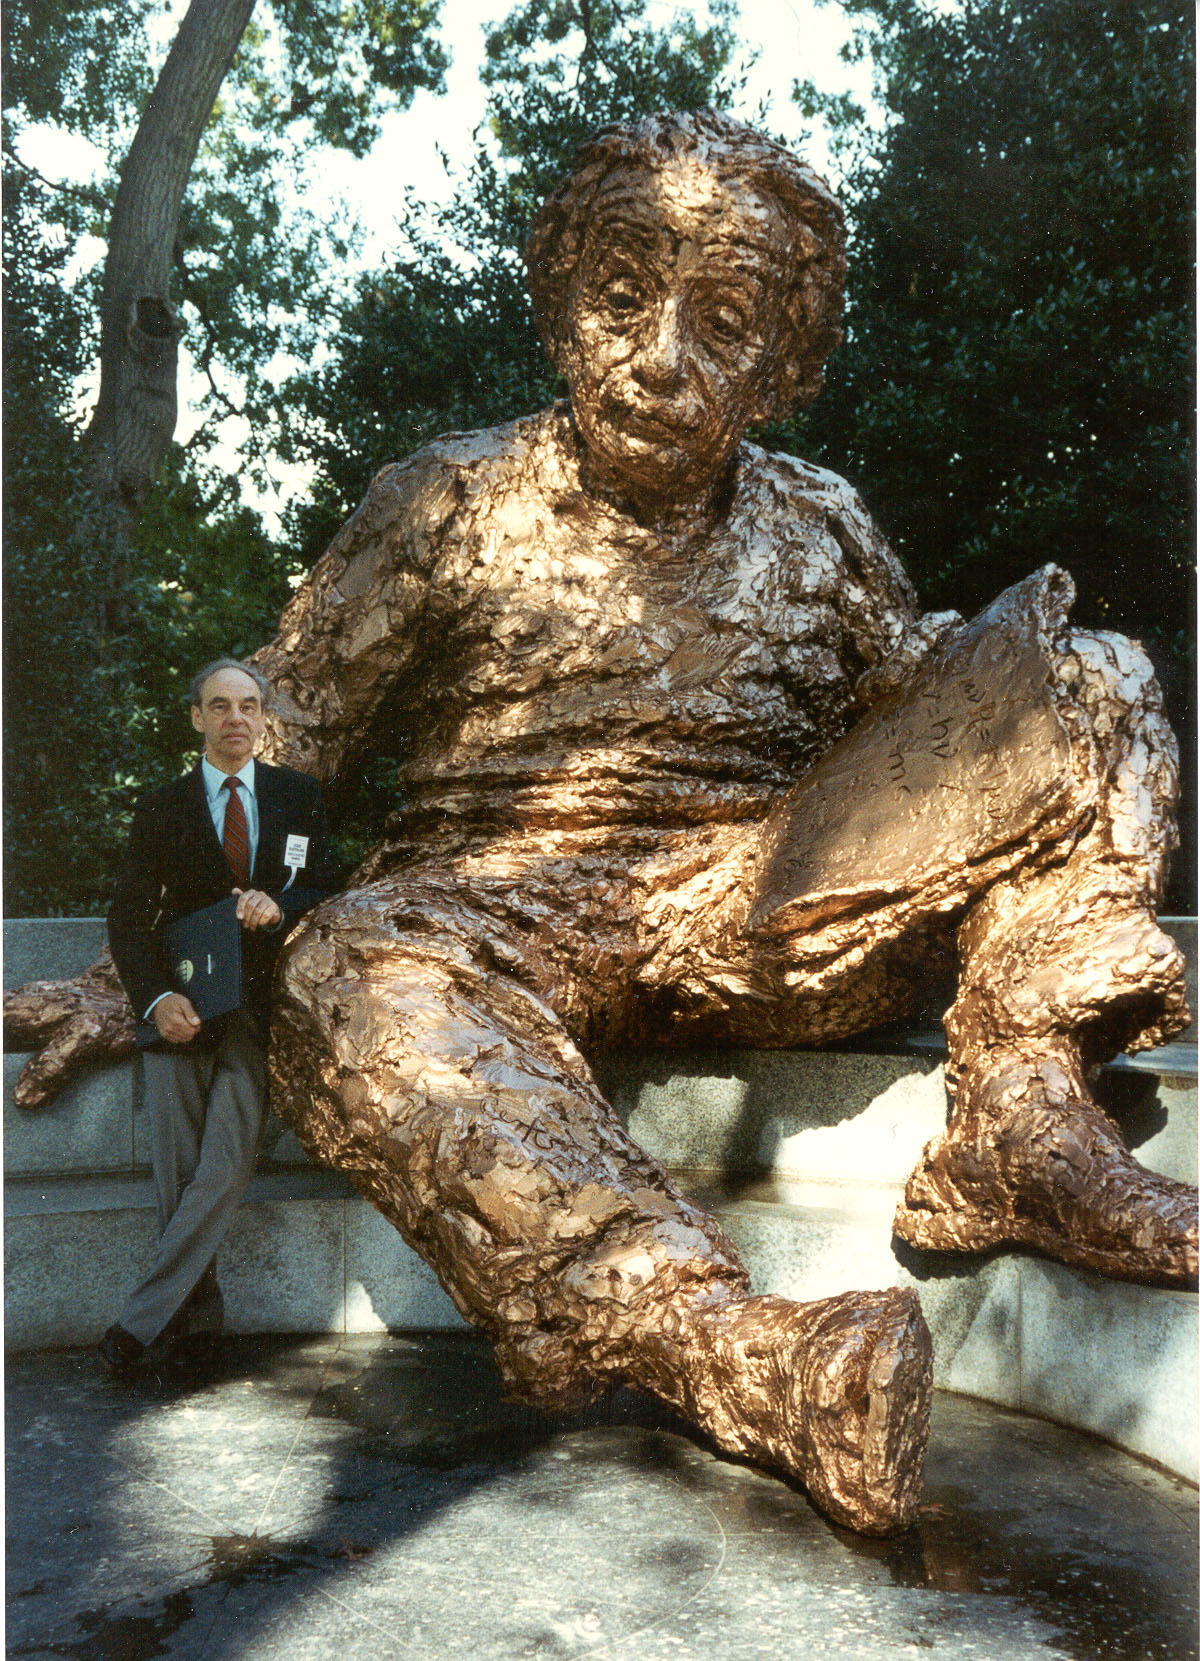 A Great Man and a Statue: Juris Hartmanis and a Statue of Albert Einstein